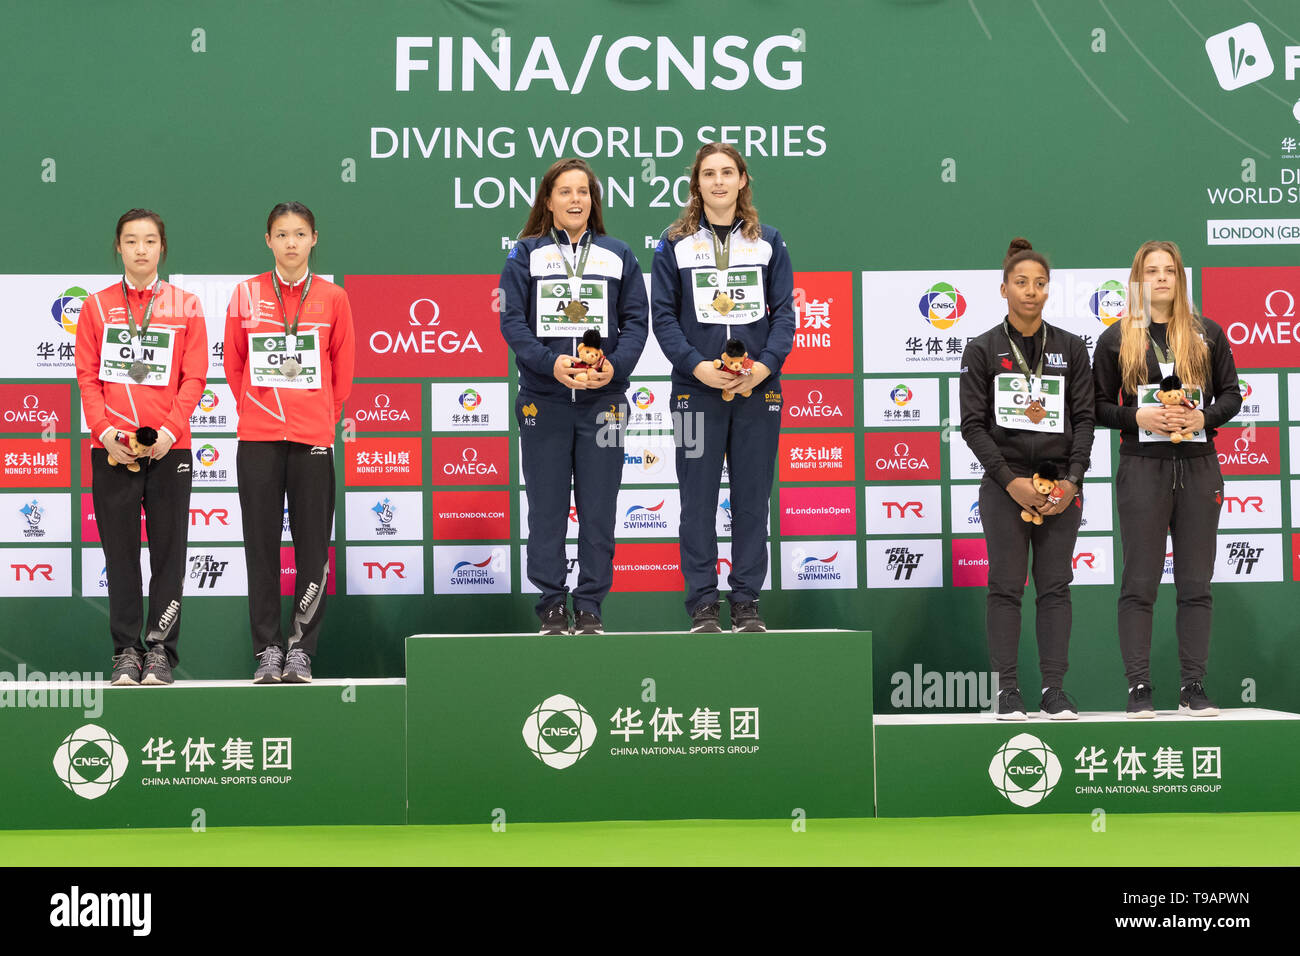 London, UK. 17th May, 2019. Shan Lin and Yani Chang (CHN) Silver, Maddison Keeney and Anabelle Smith (AUS) Gold and Jennifer Abel and Celine van Duijn (CAN) Bronze) at the Winners presentations after compete in Women's 3m Synchro Springboard Final during FINA/CNSG Diving World Series Final at London Aquatics Centre on Friday, 17 May 2019. London England.  Credit: Taka G Wu/Alamy Live News Stock Photo